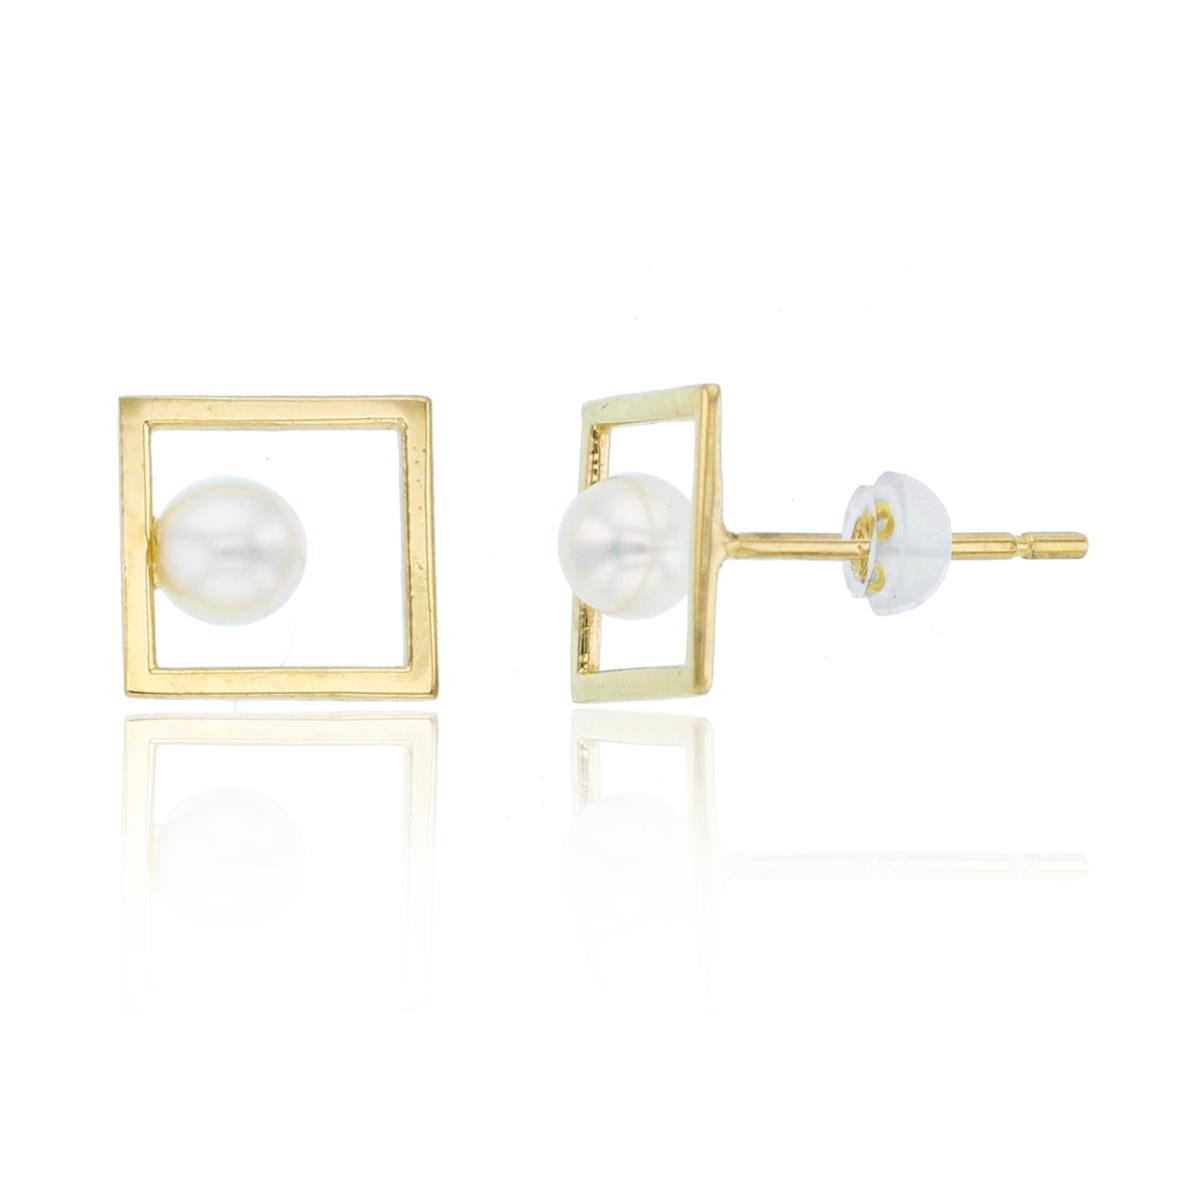 10K Yellow Gold 3mm Fresh Water Pearl on Open Square Studs with Silicon Backs